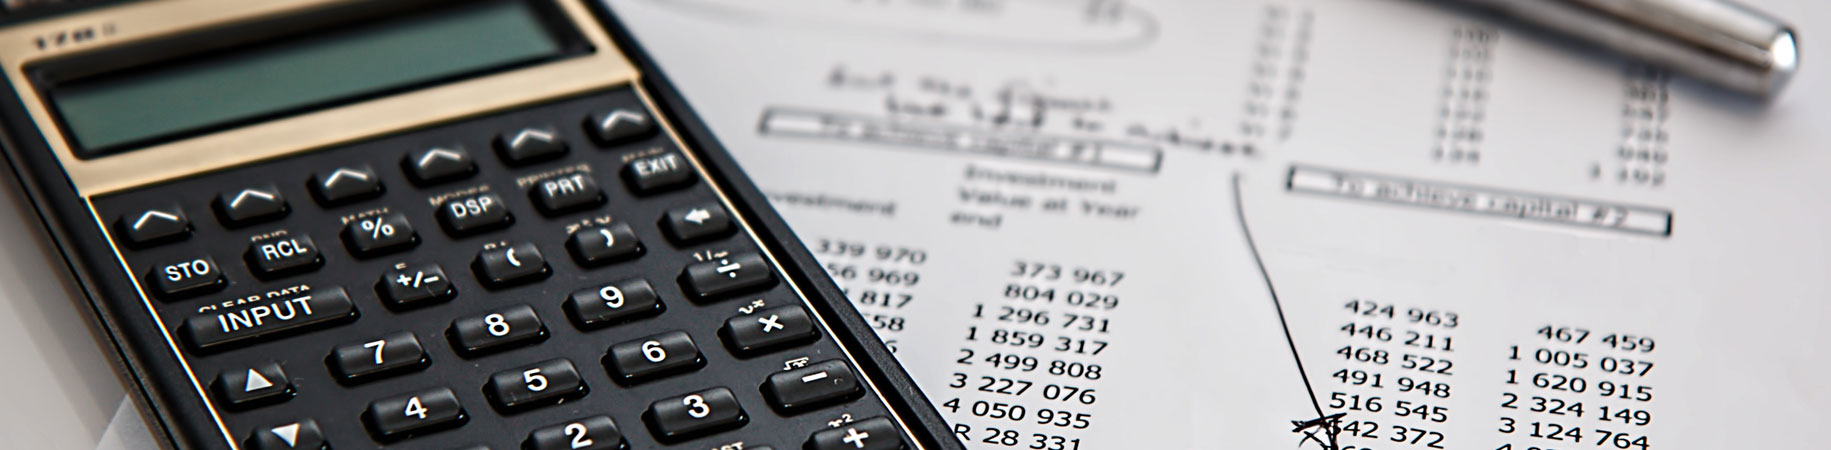 A calculator on top of financial papers.